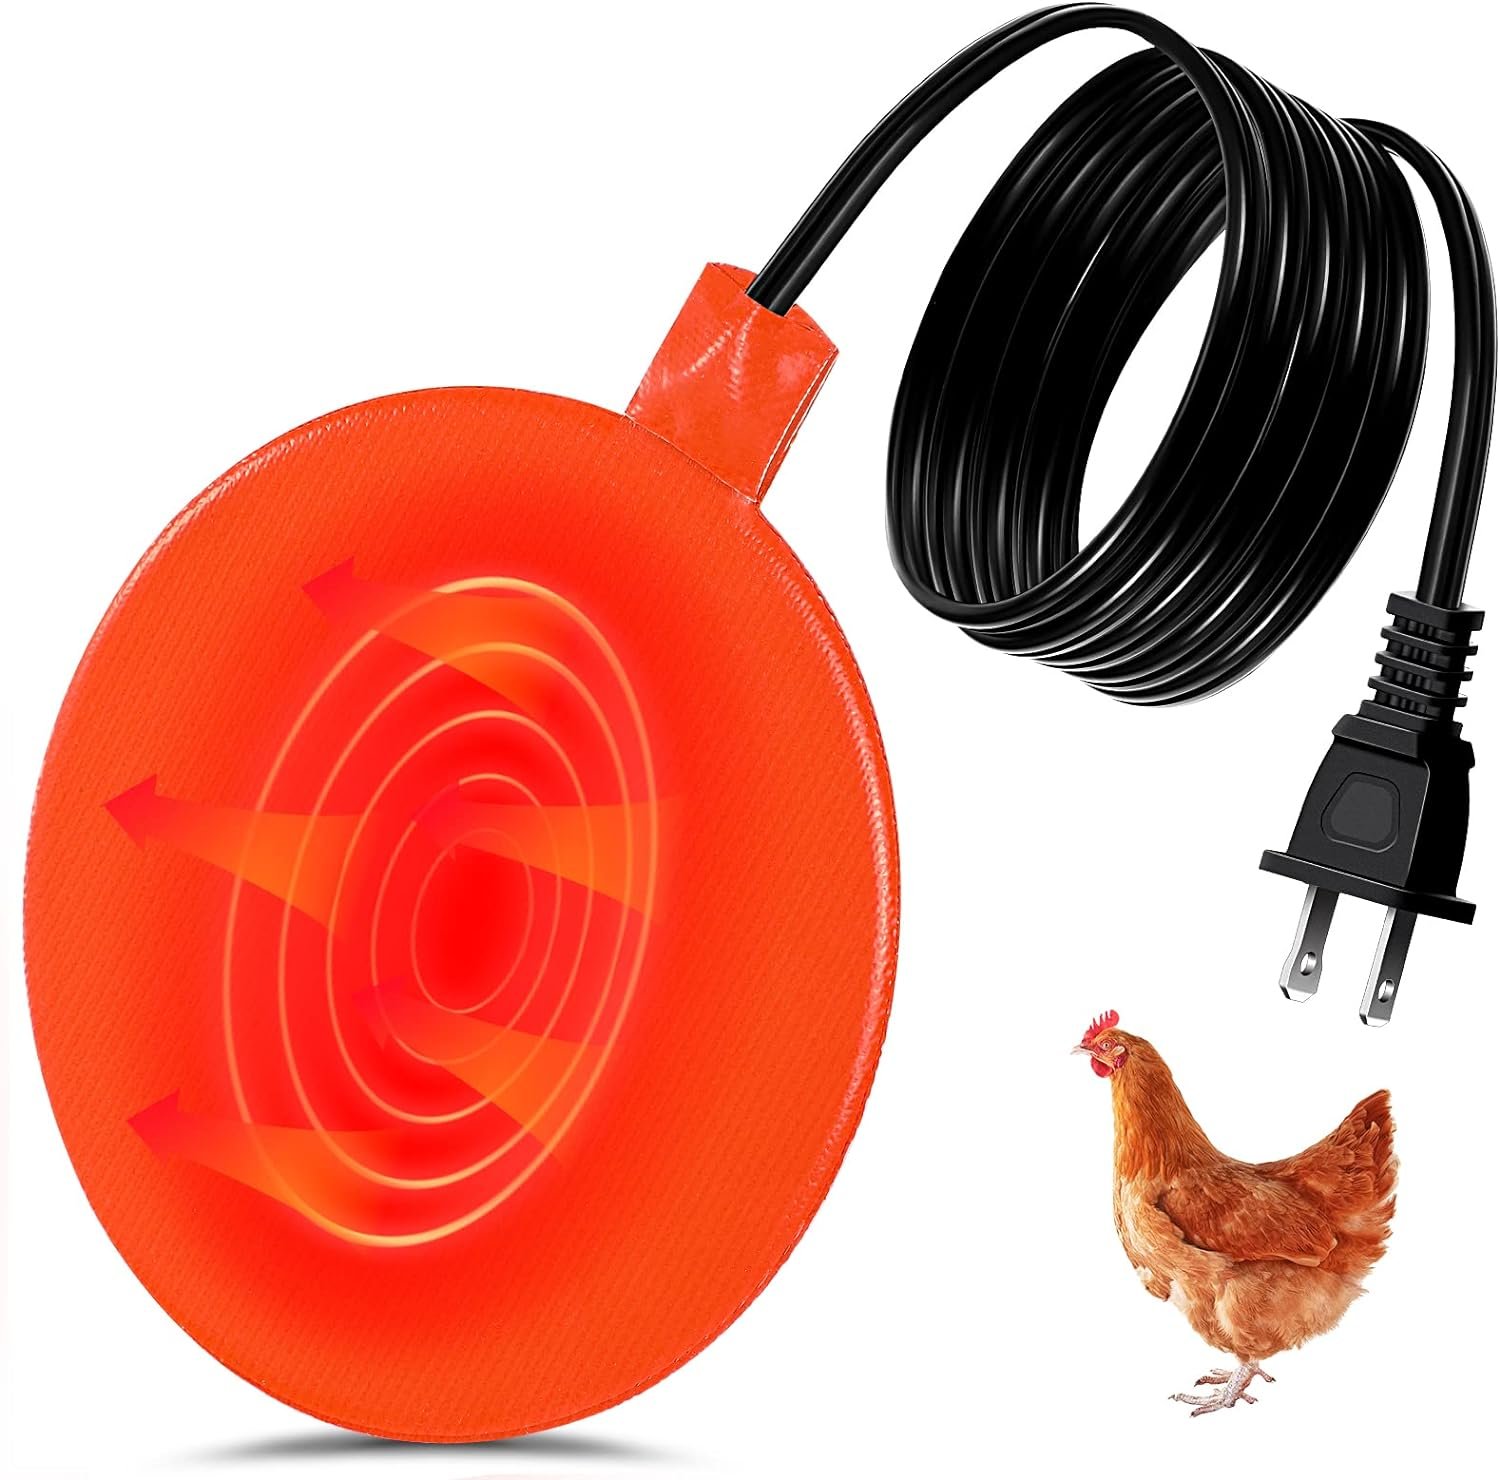 Chicken Water Heater, Poultry Water Heater Base 120v 35w Silicone Heated Pad Chicken Waterer Heated Chicken Coop Heater for Metal Bucket Stock Tank with 47.24 Inches Cord (Orange)